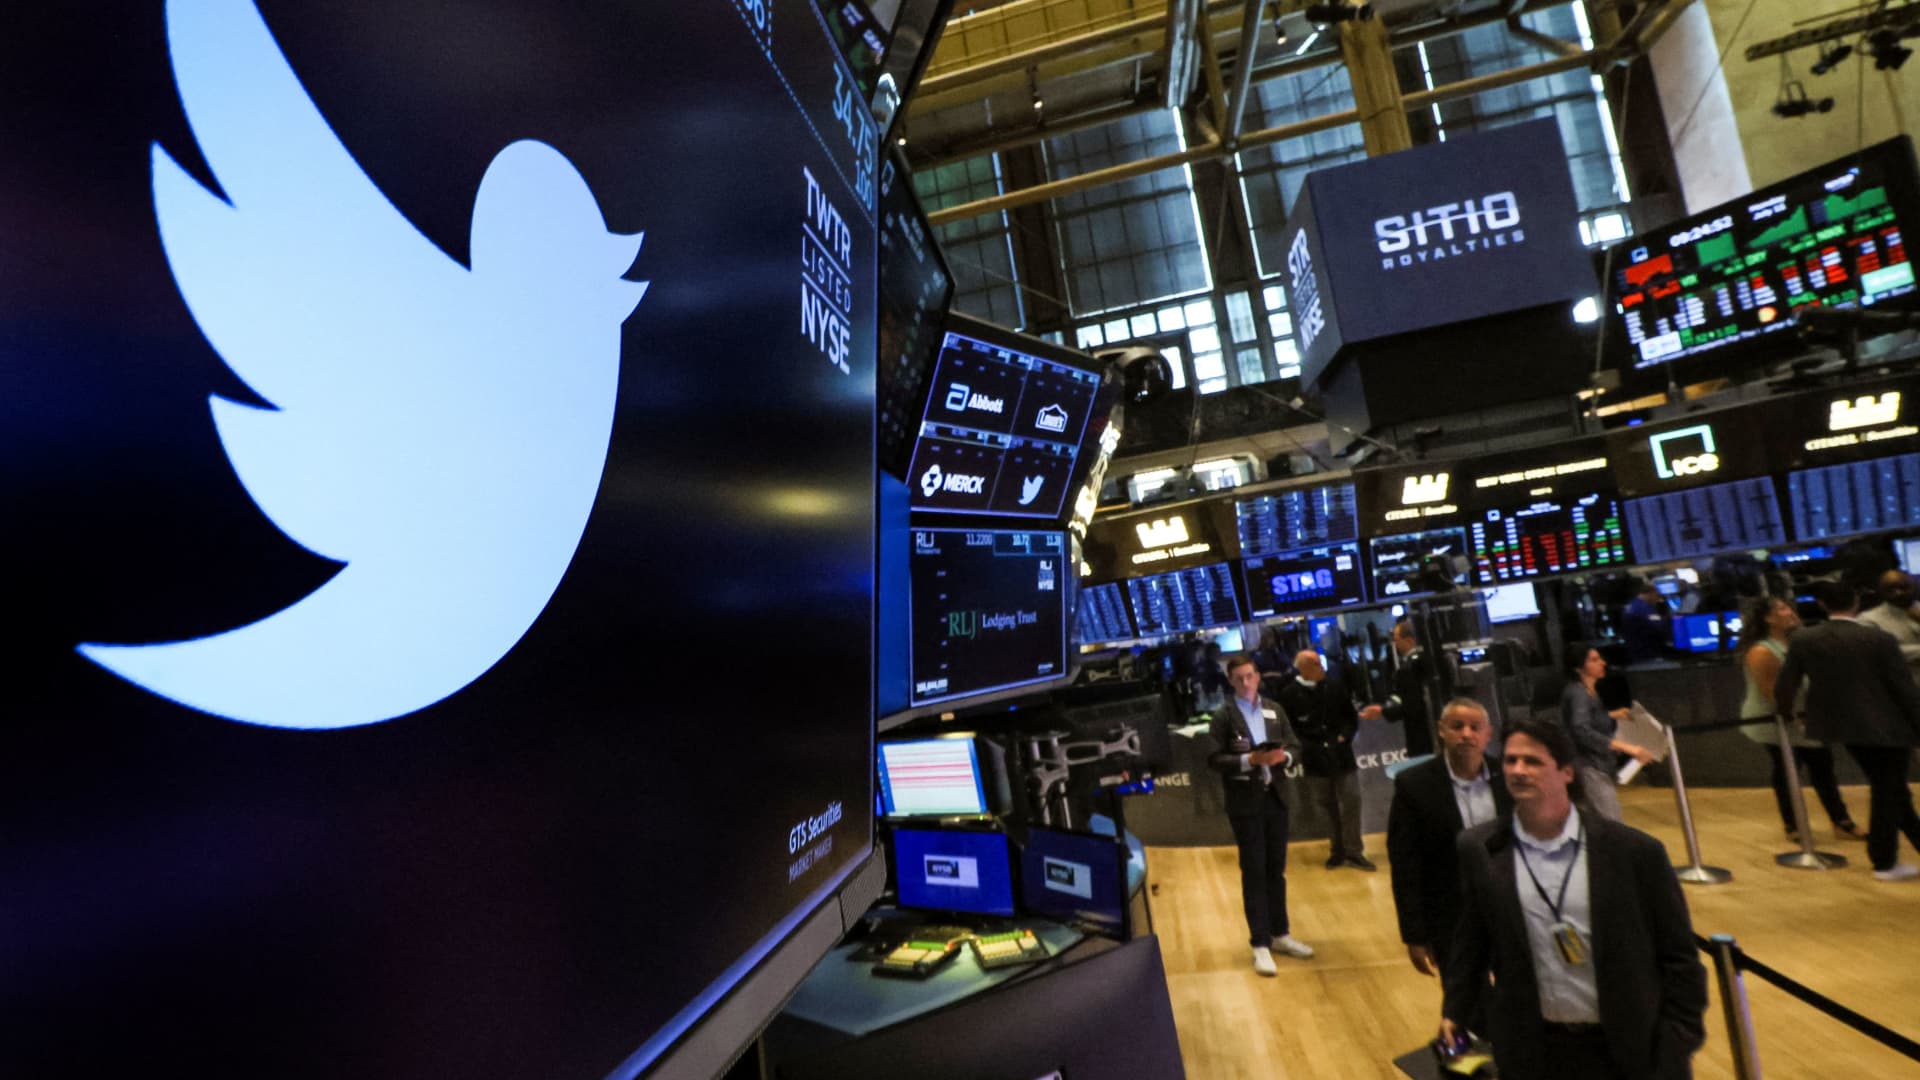 Twitter outage impacted users around the world Thursday morning